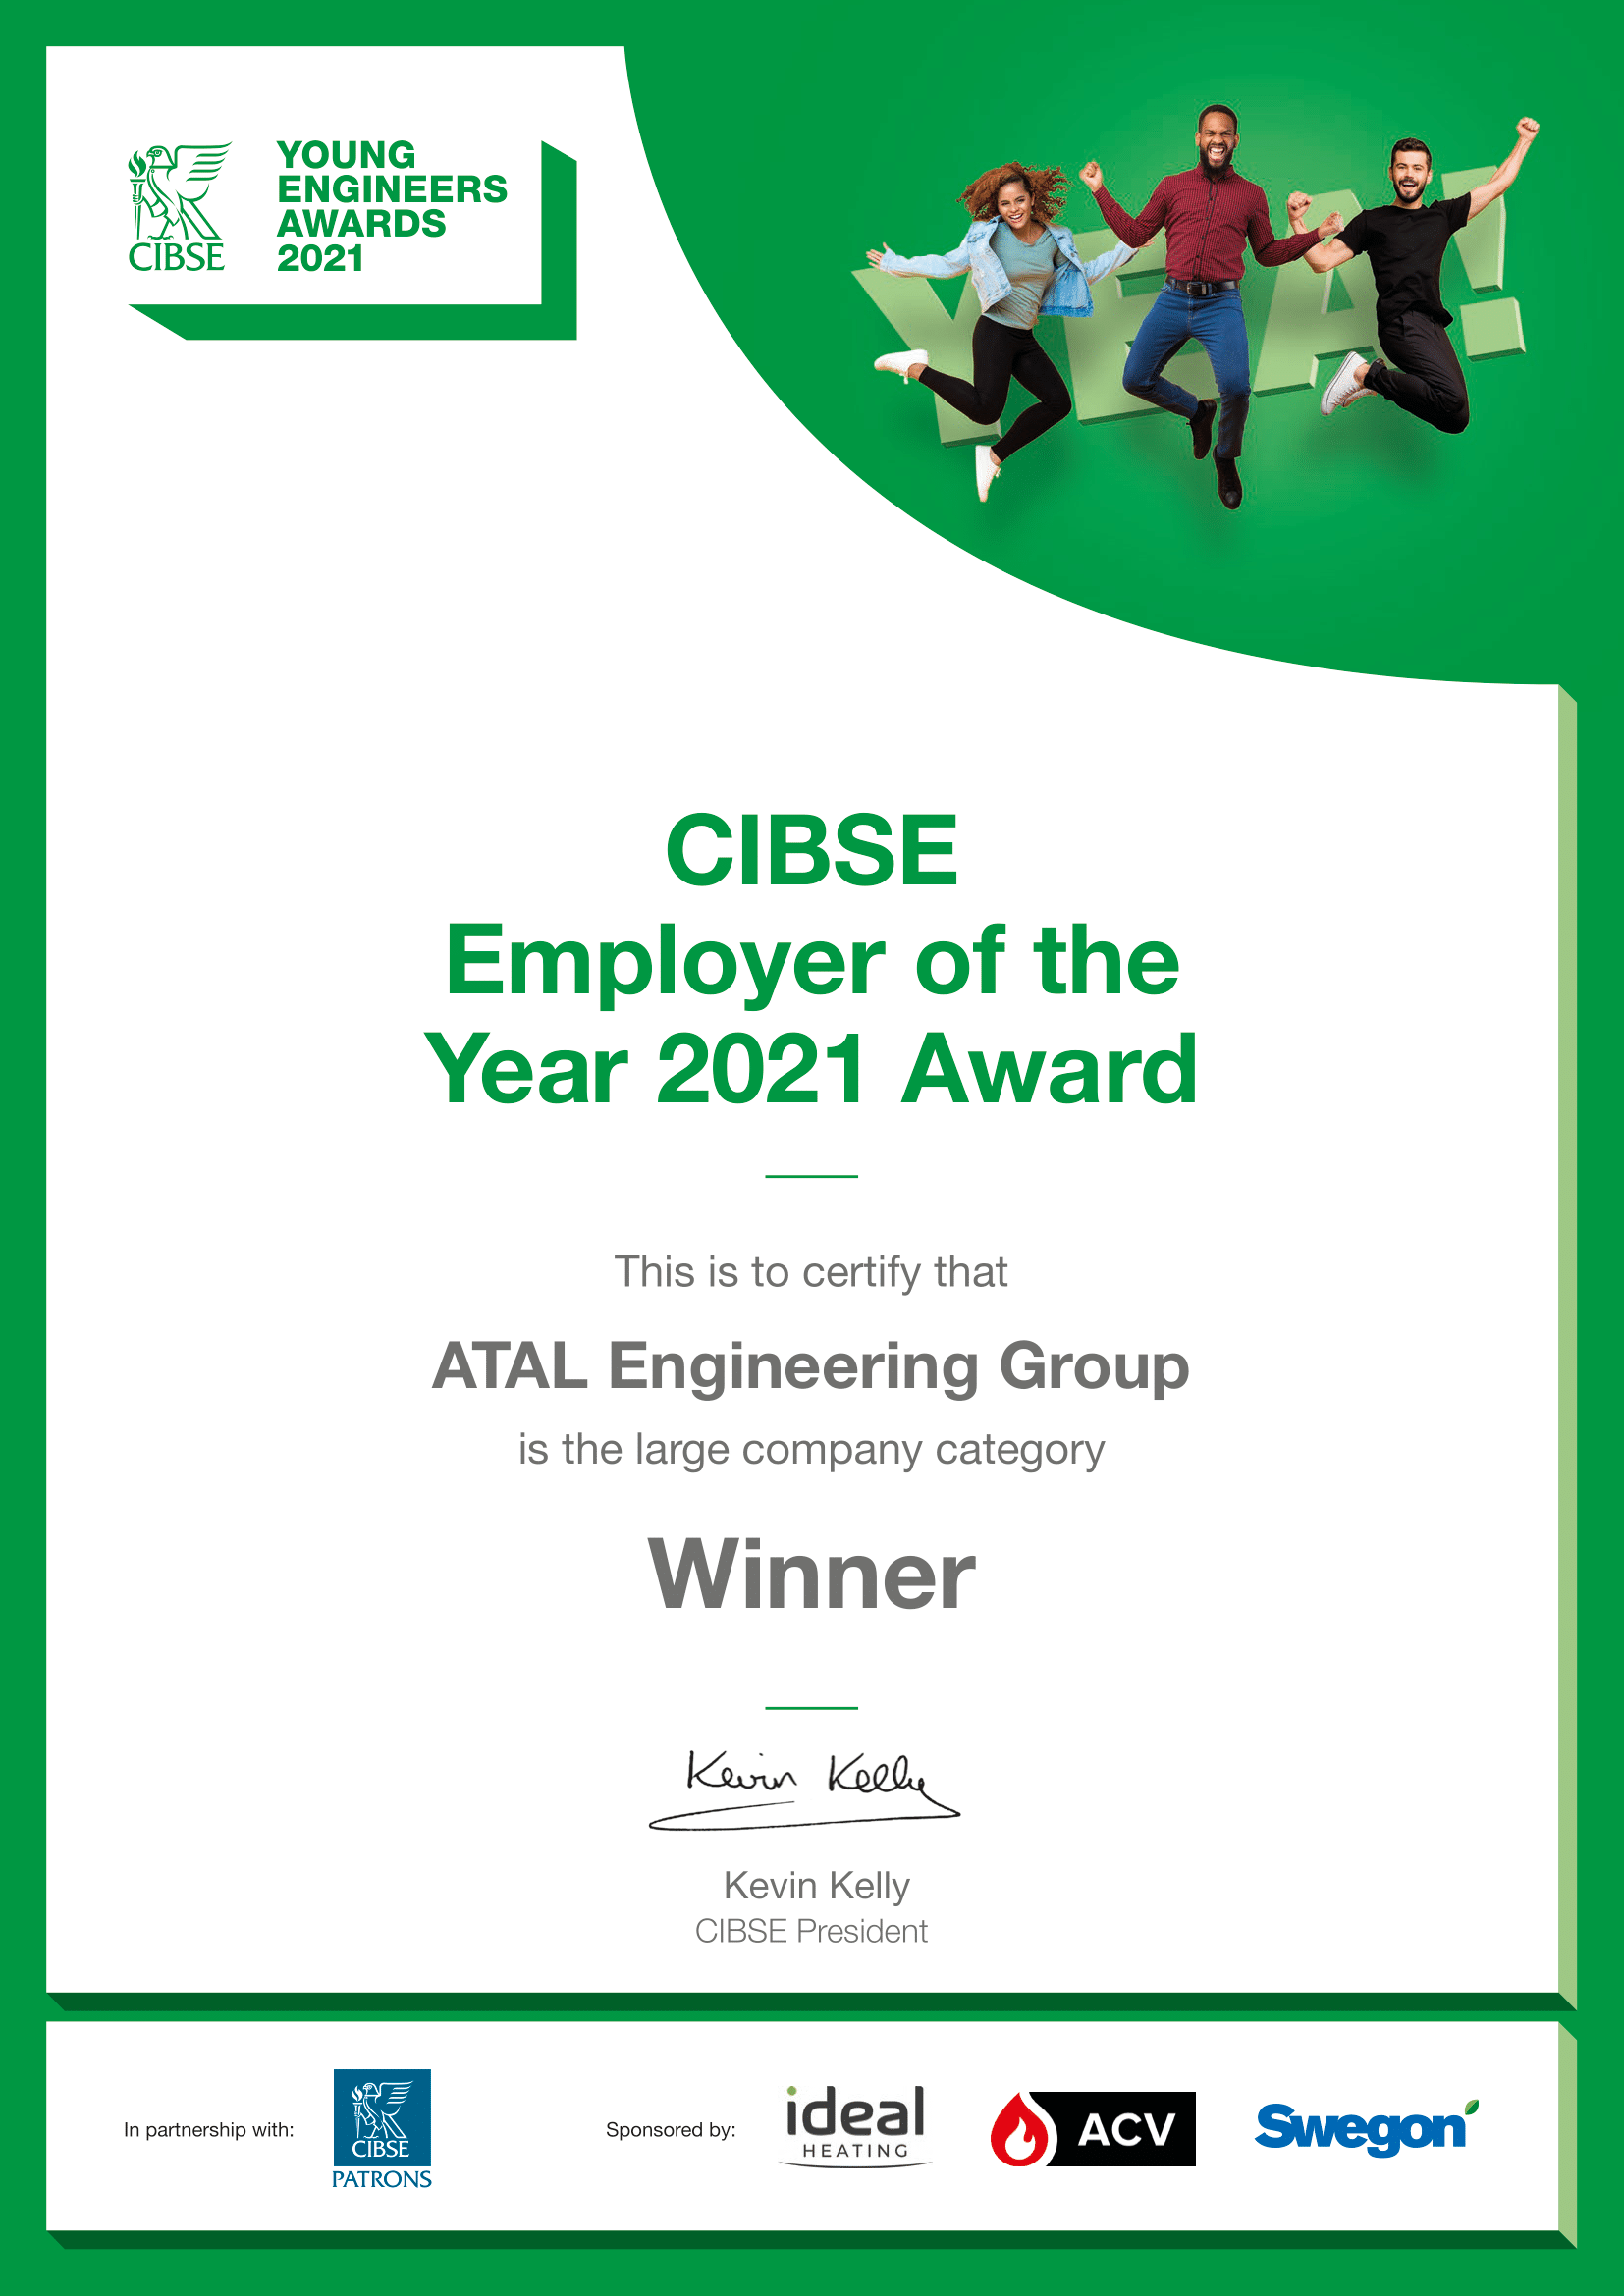 ATAL is the first company from Hong Kong to have won the Employer of the Year Award (Large Category) at CIBSE Young Engineers Awards 2021